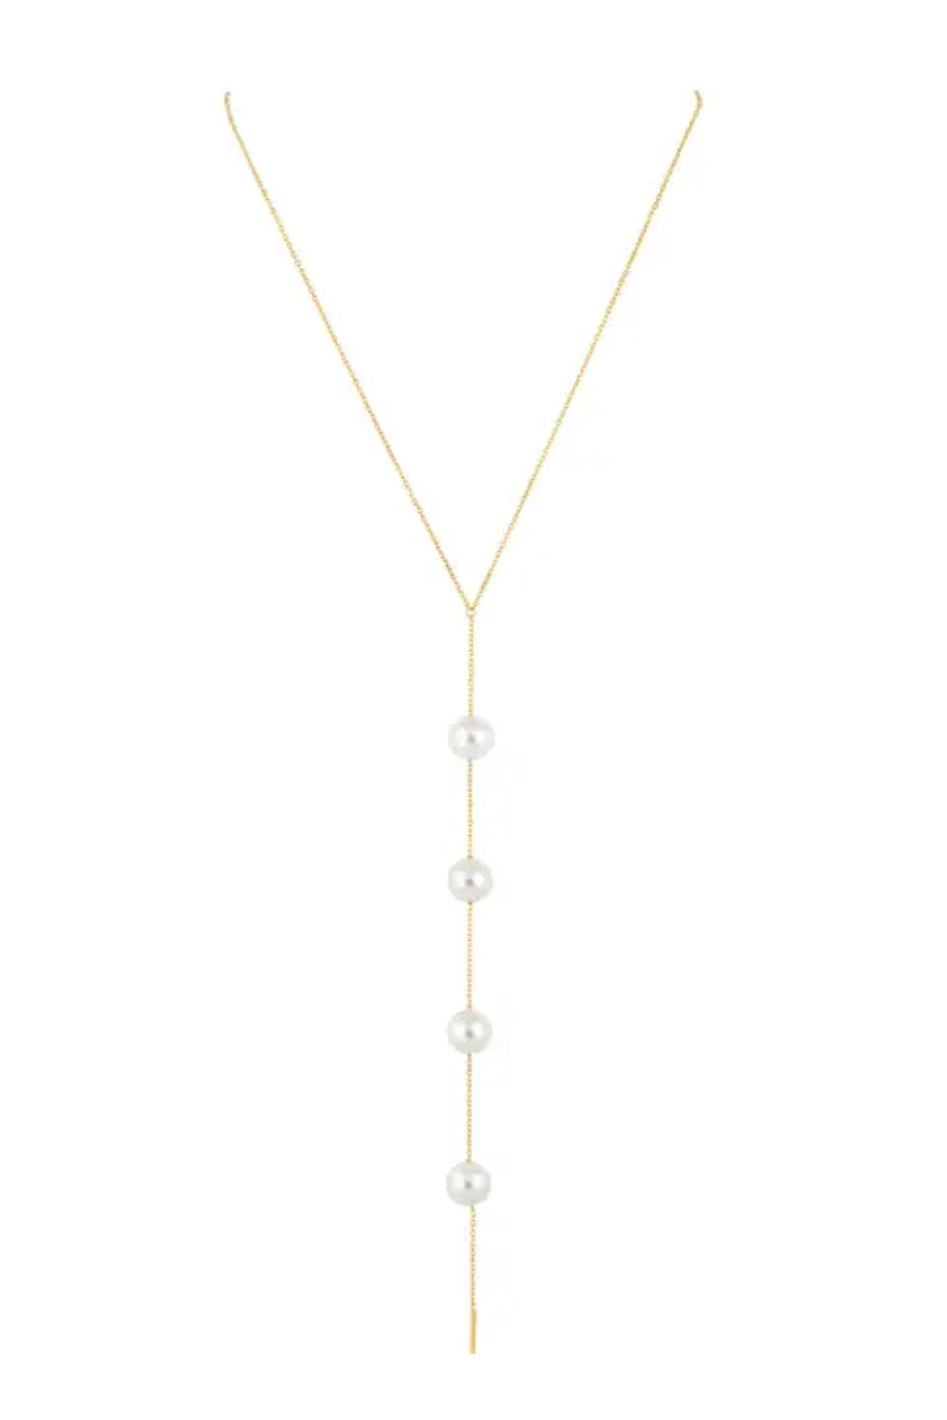 Cindy Pearl Lariat Necklace - Expressive Collective CO.